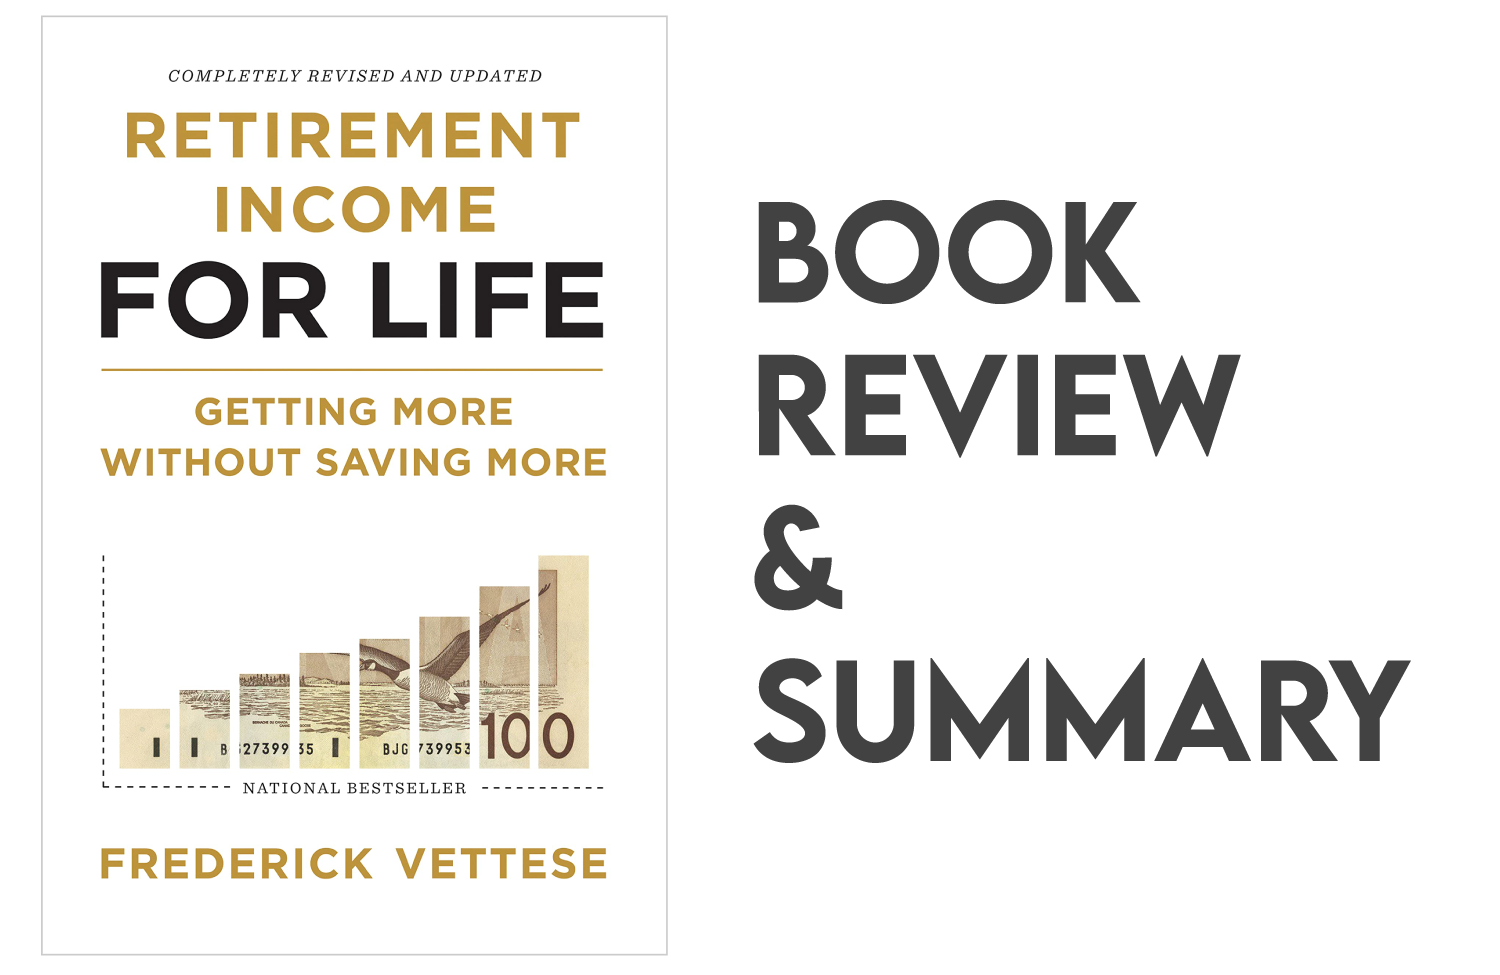 You are currently viewing “Retirement Income For Life” by Frederick Vettese : Book Review and Summary